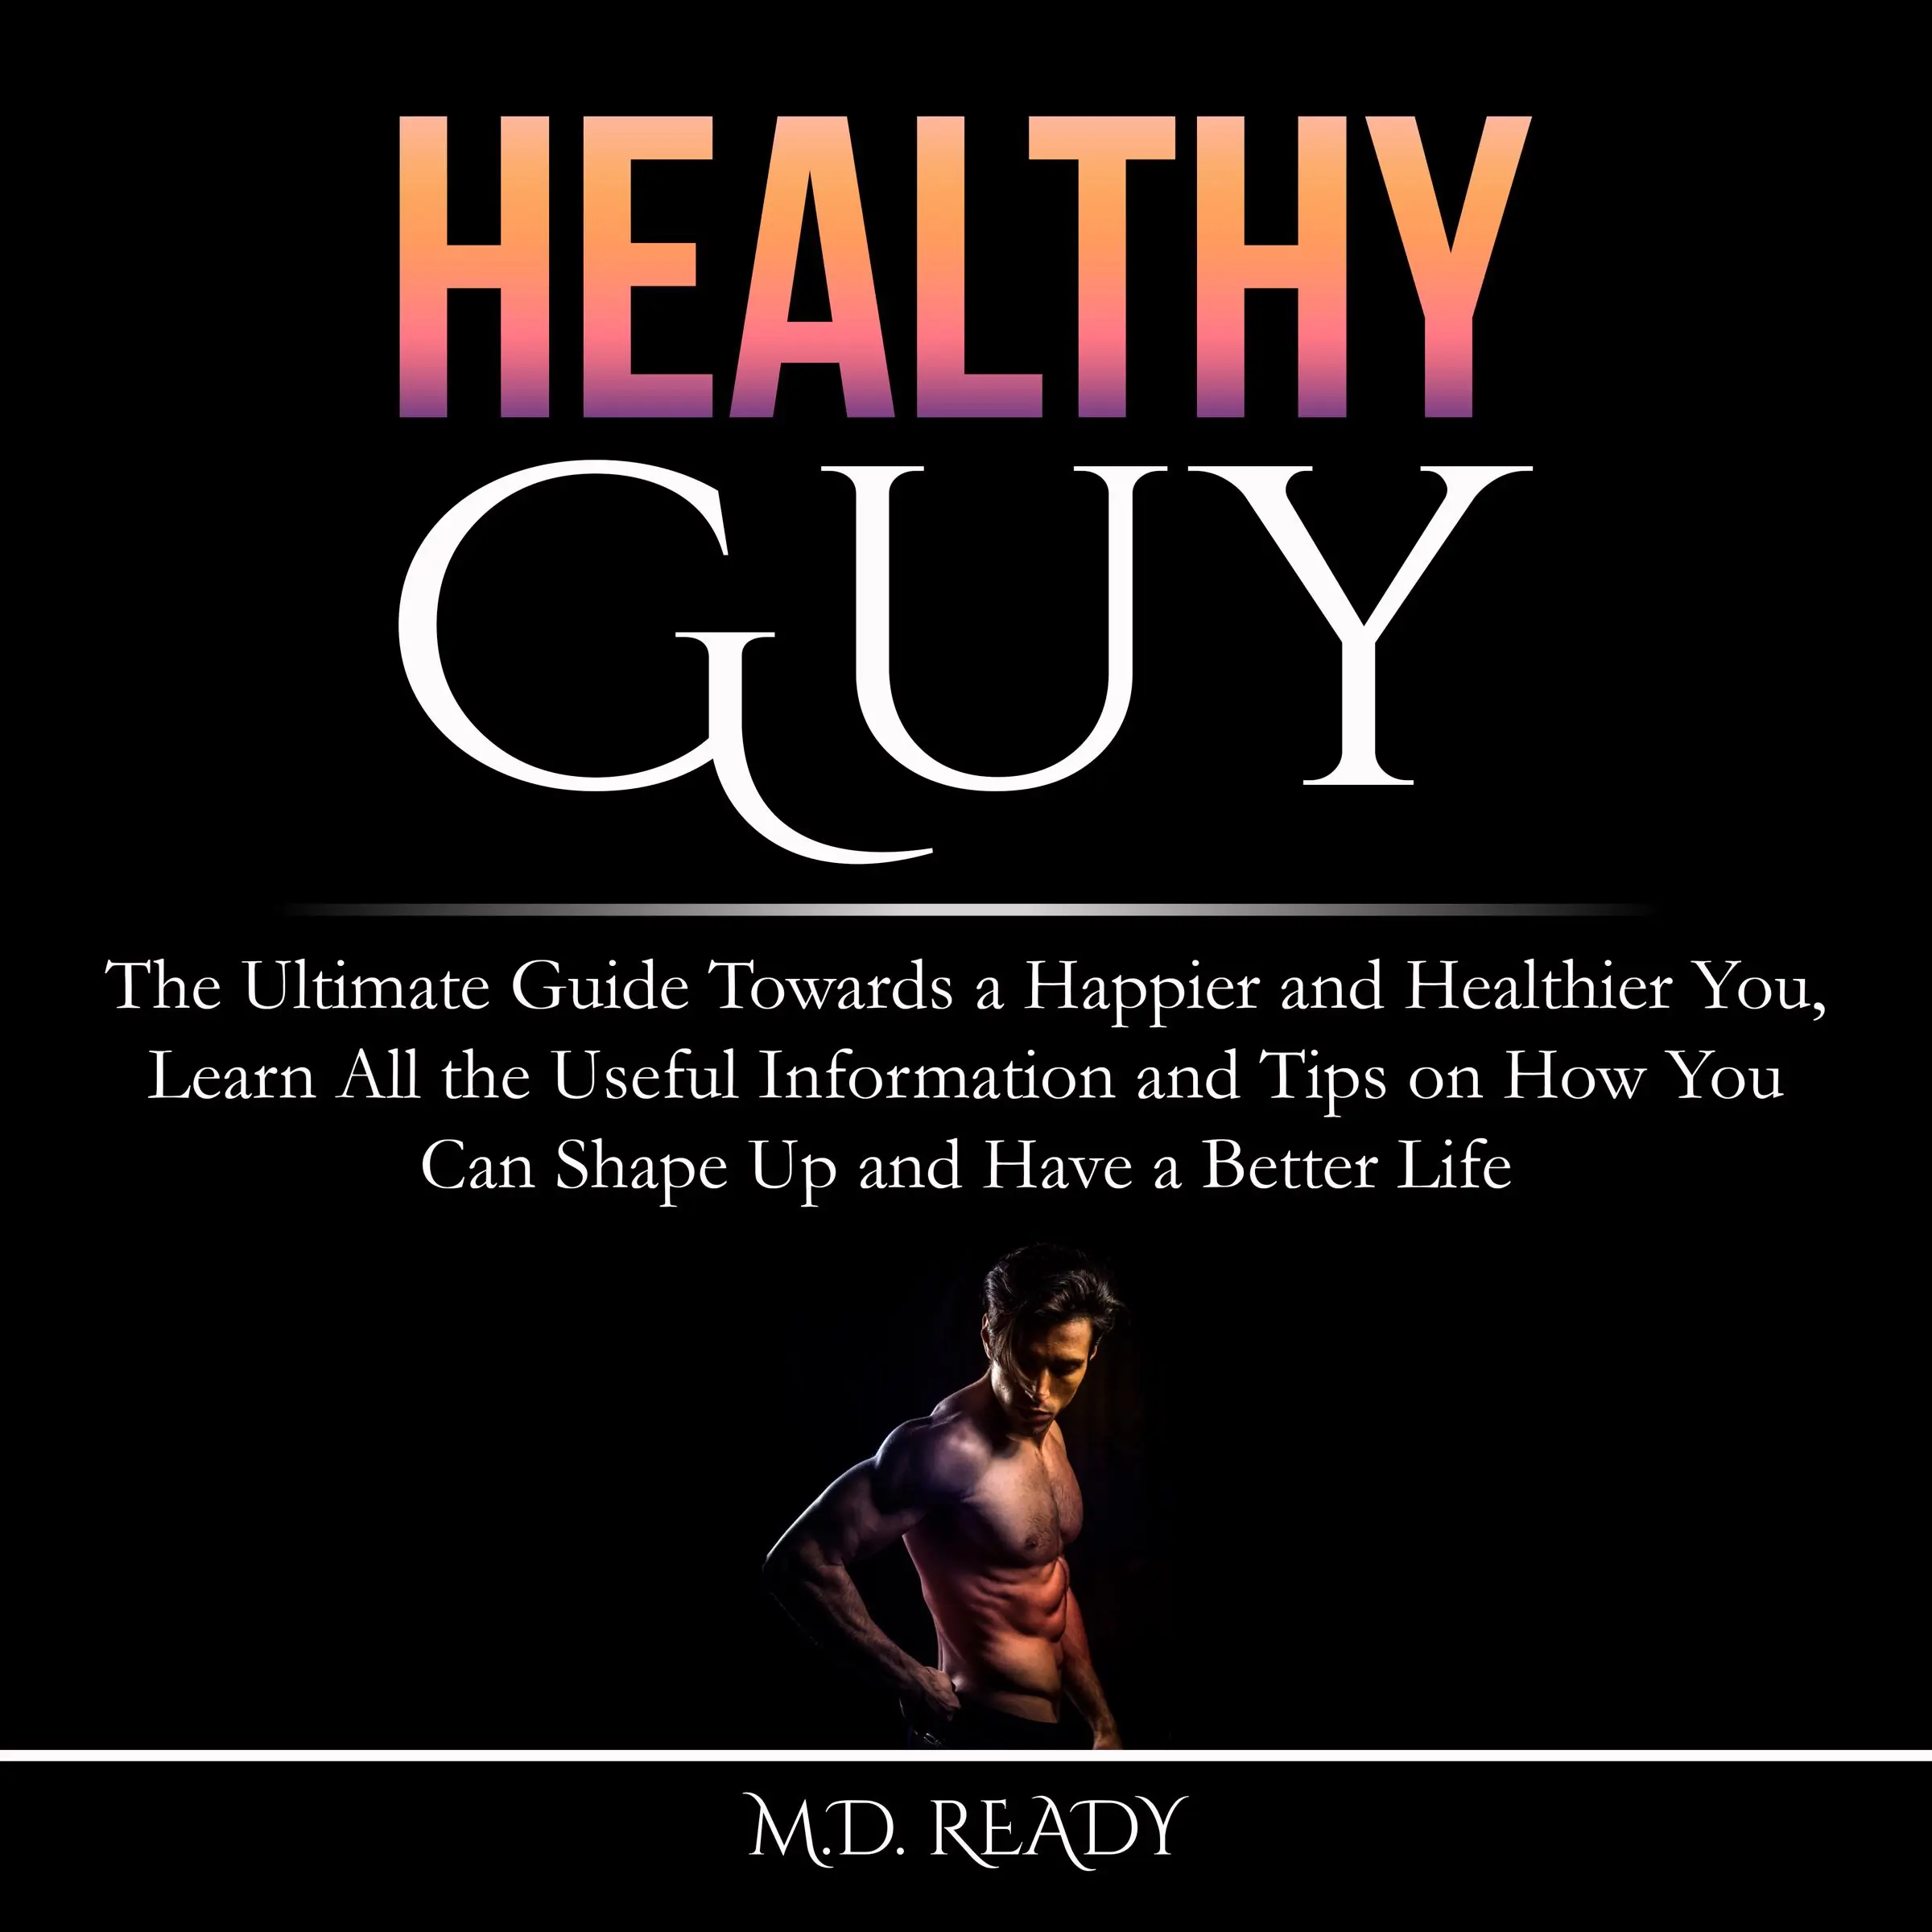 Healthy Guy: The Ultimate Guide Towards a Happier and Healthier You, Learn All the Useful Information and Tips on How You Can Shape Up and Have a Better Life Audiobook by M.D. Ready